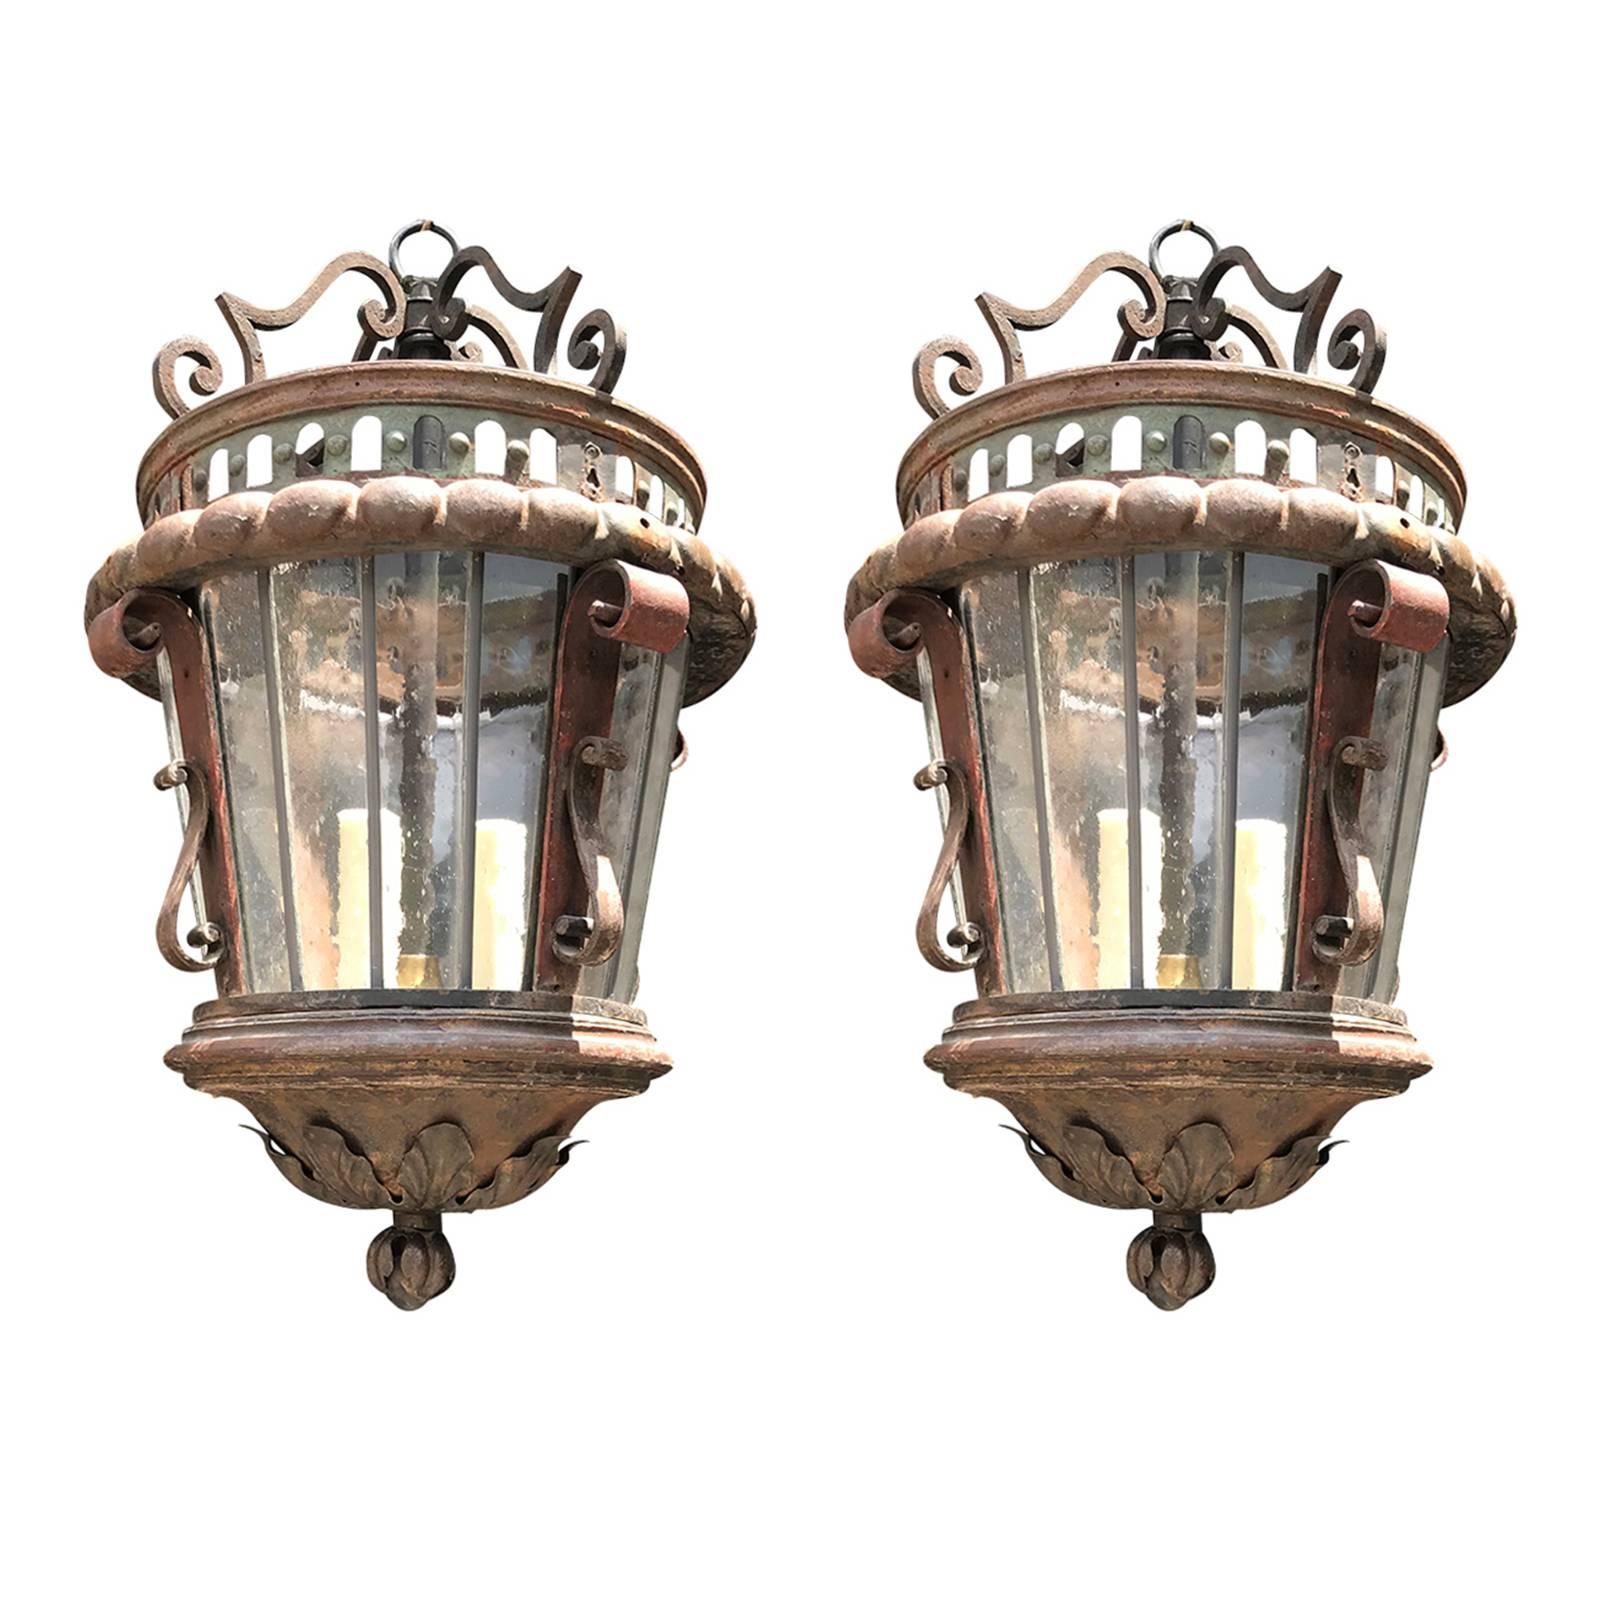 Pair of Late 19th and Early 20th Century Continental Iron Lanterns